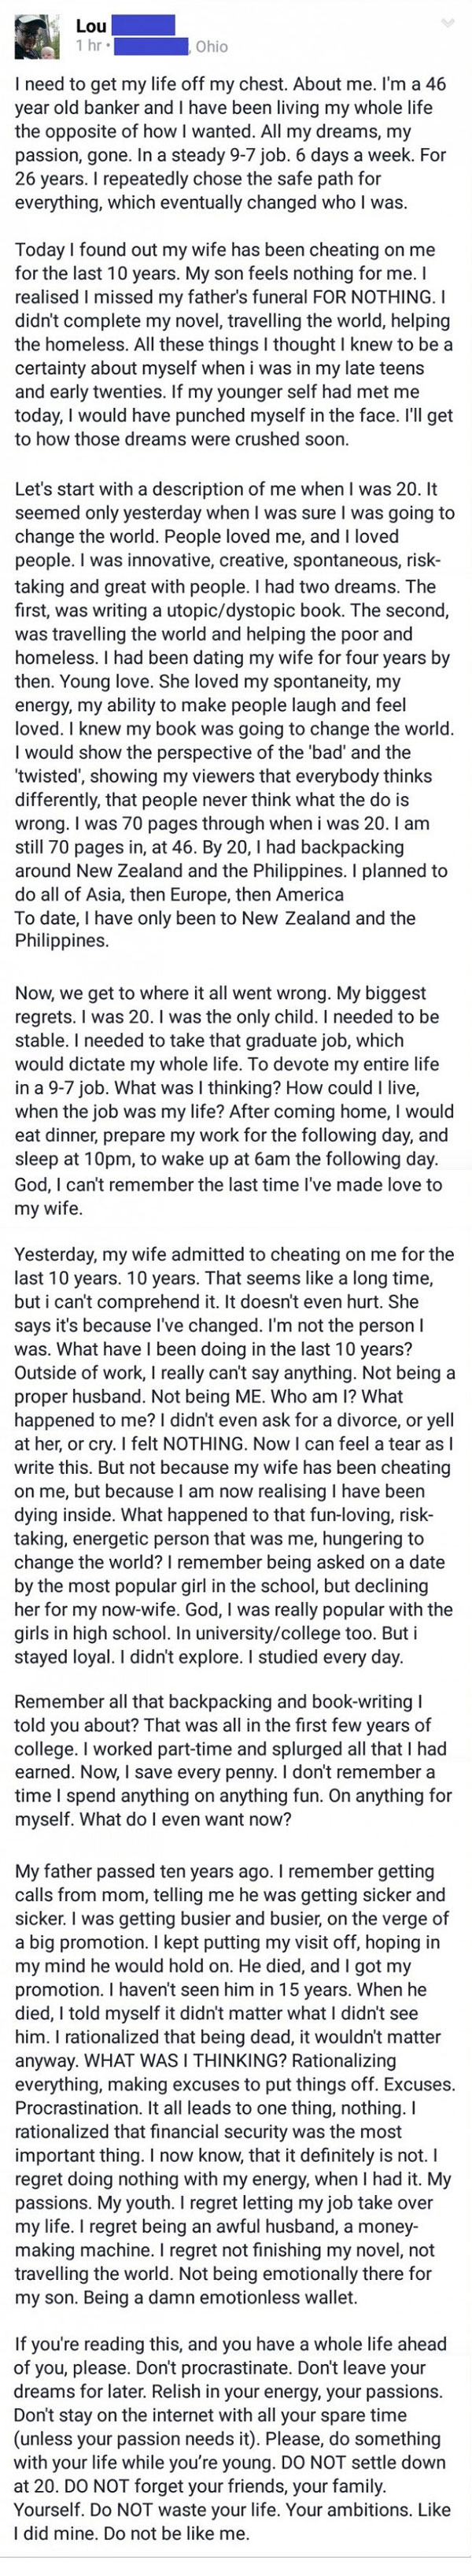 man's wife cheats inspires others